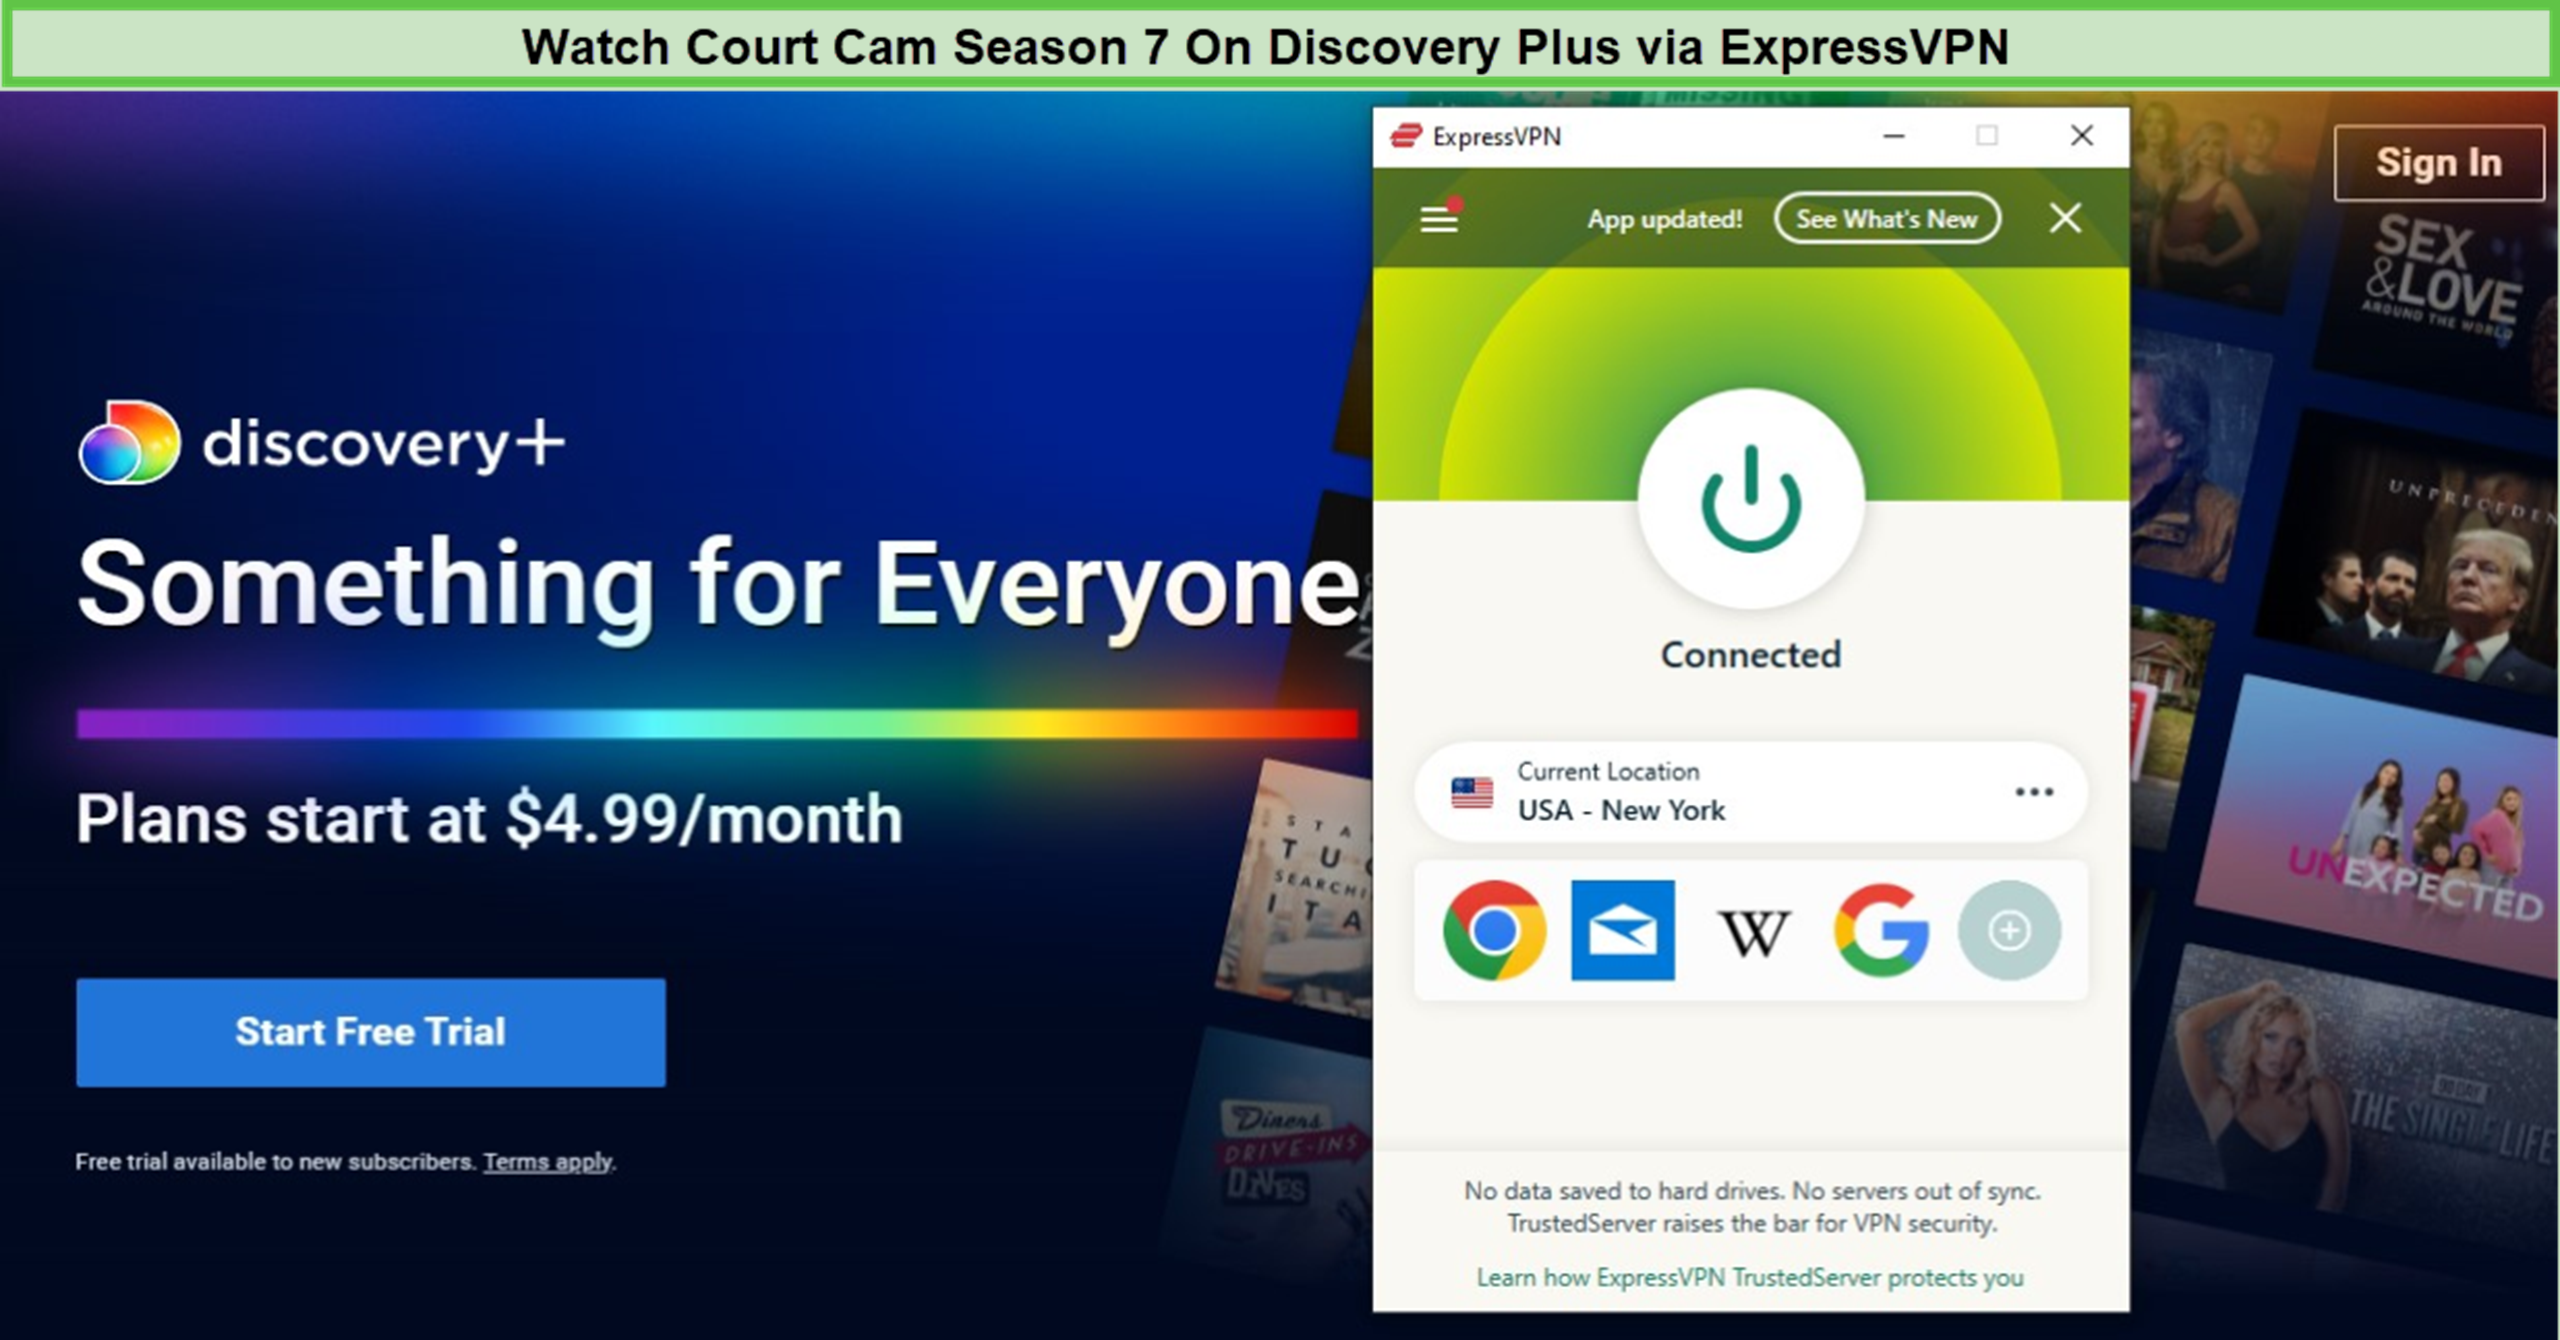 Watch-Court-Cam-Season-7-in-Spain-on-Discovery-Plus-With-ExpressVPN